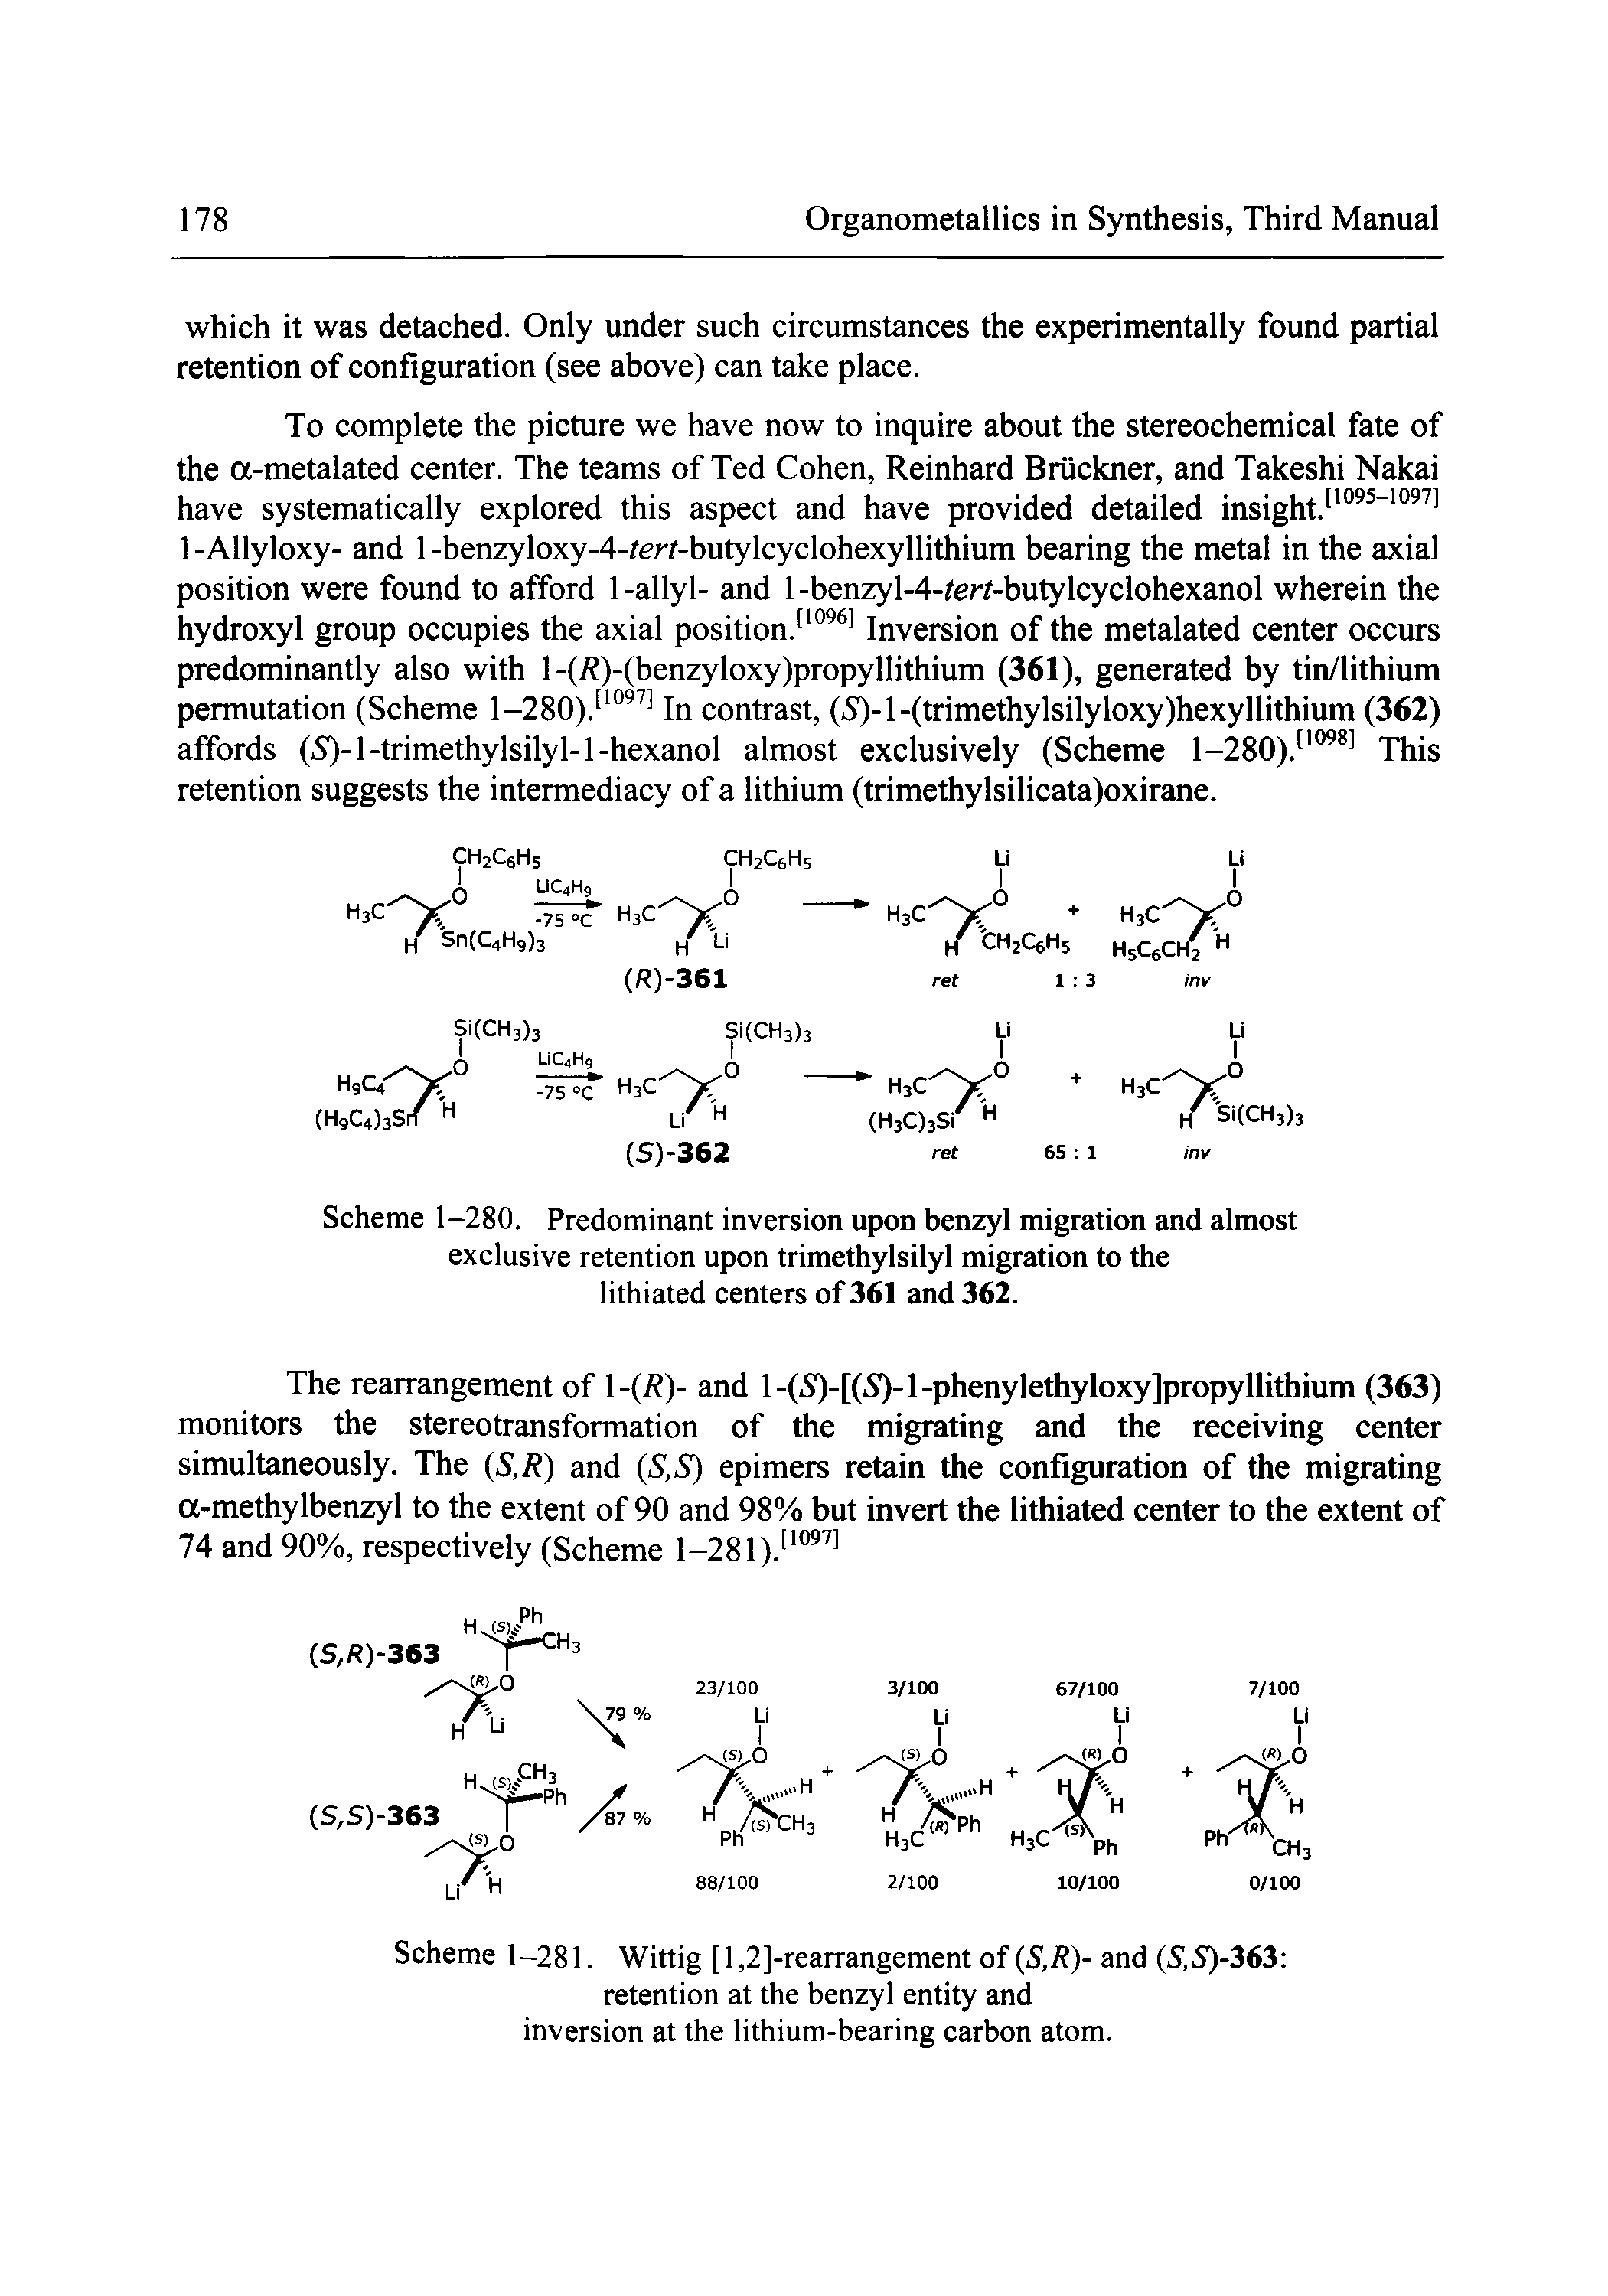 Scheme 1-280. Predominant inversion upon benzyl migration and almost exclusive retention upon trimethylsilyl migration to the lithiated centers of 361 and 362.